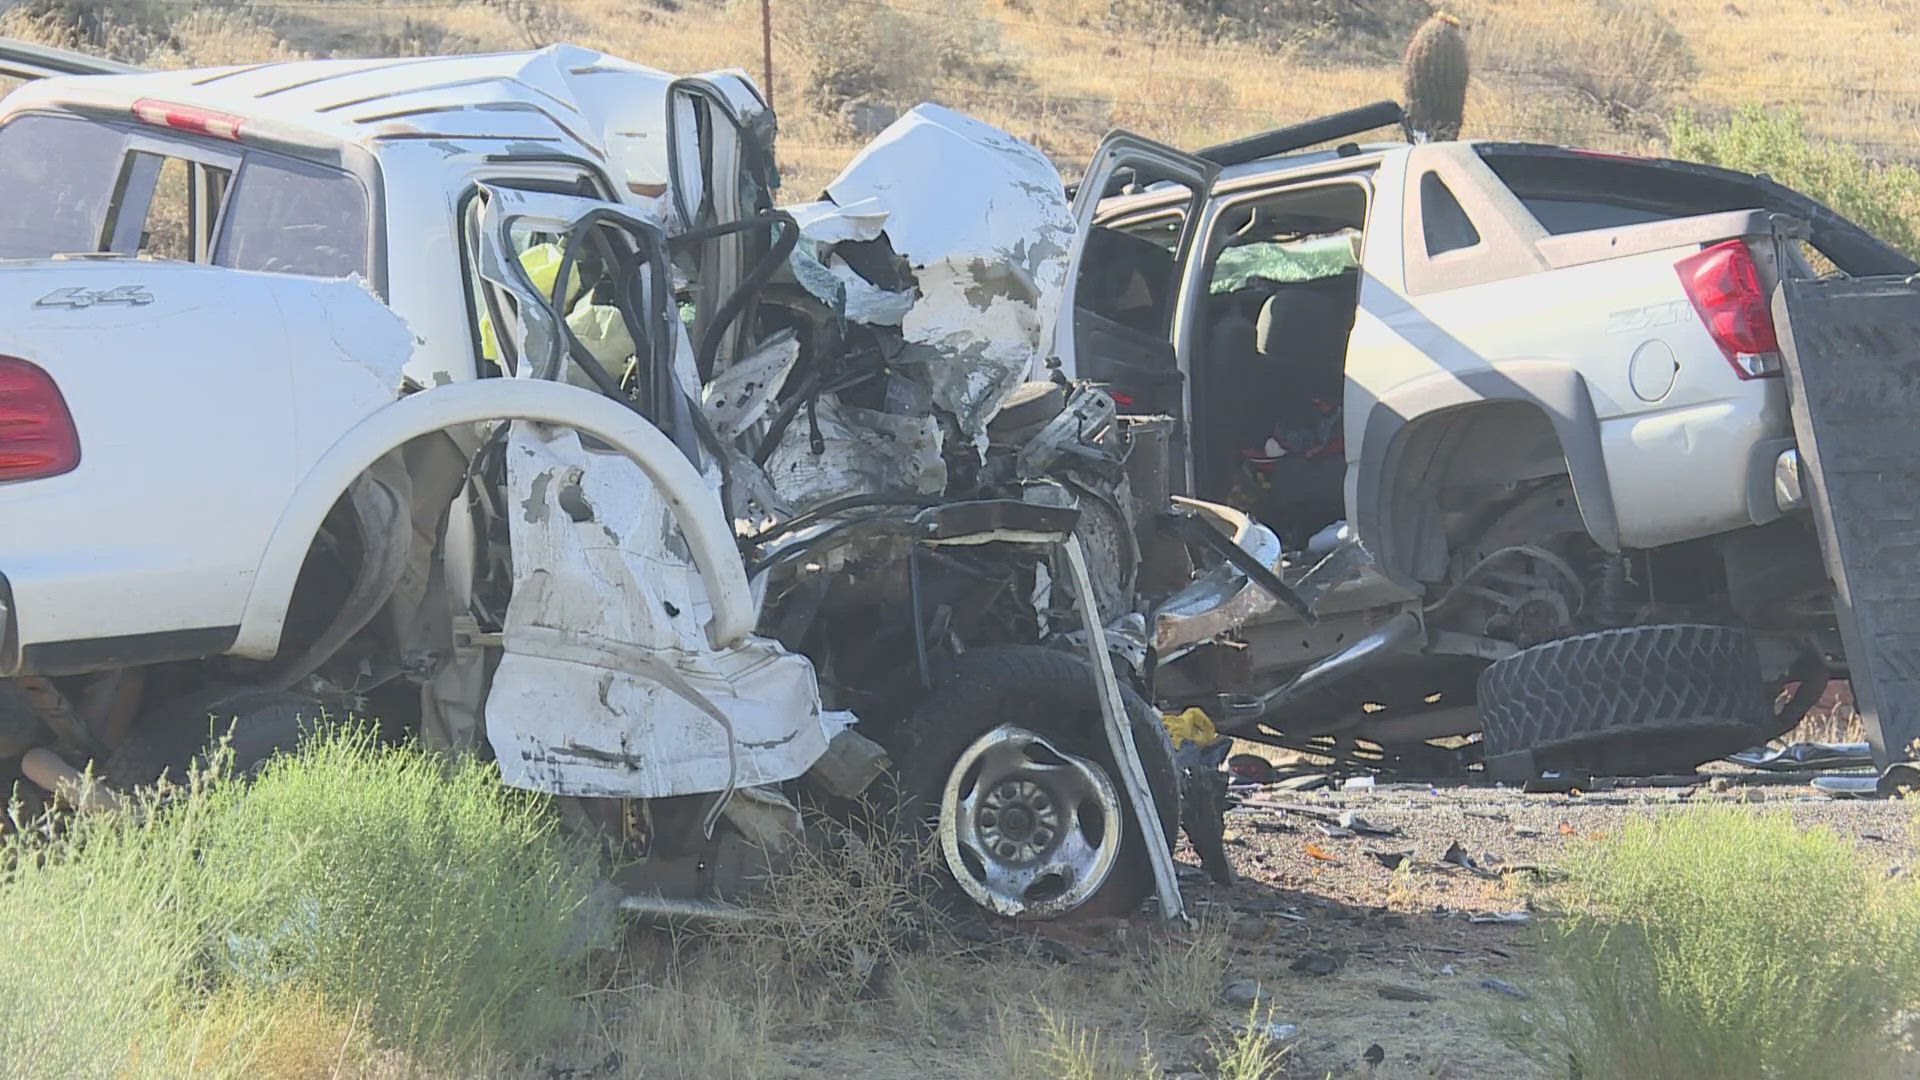 The family of a man they say was killed in a car crash Sunday is looking for answers. A total of three people died in the wrong-way collision.